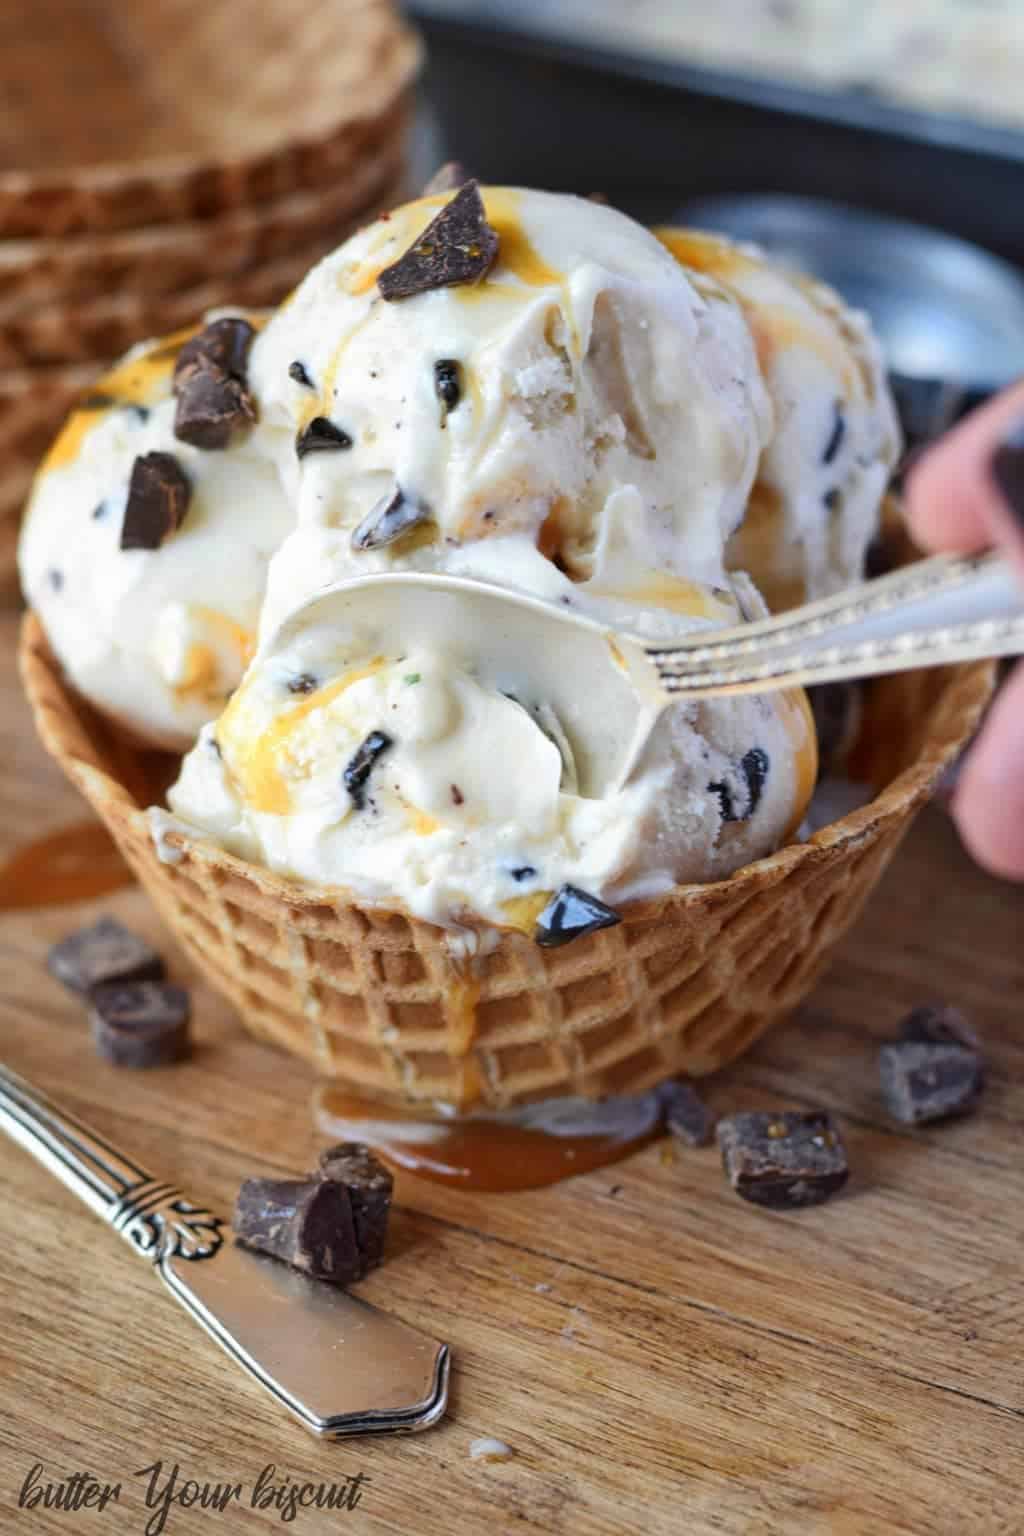 A spoon picking up a bite of ice cream in a waffle bowl.